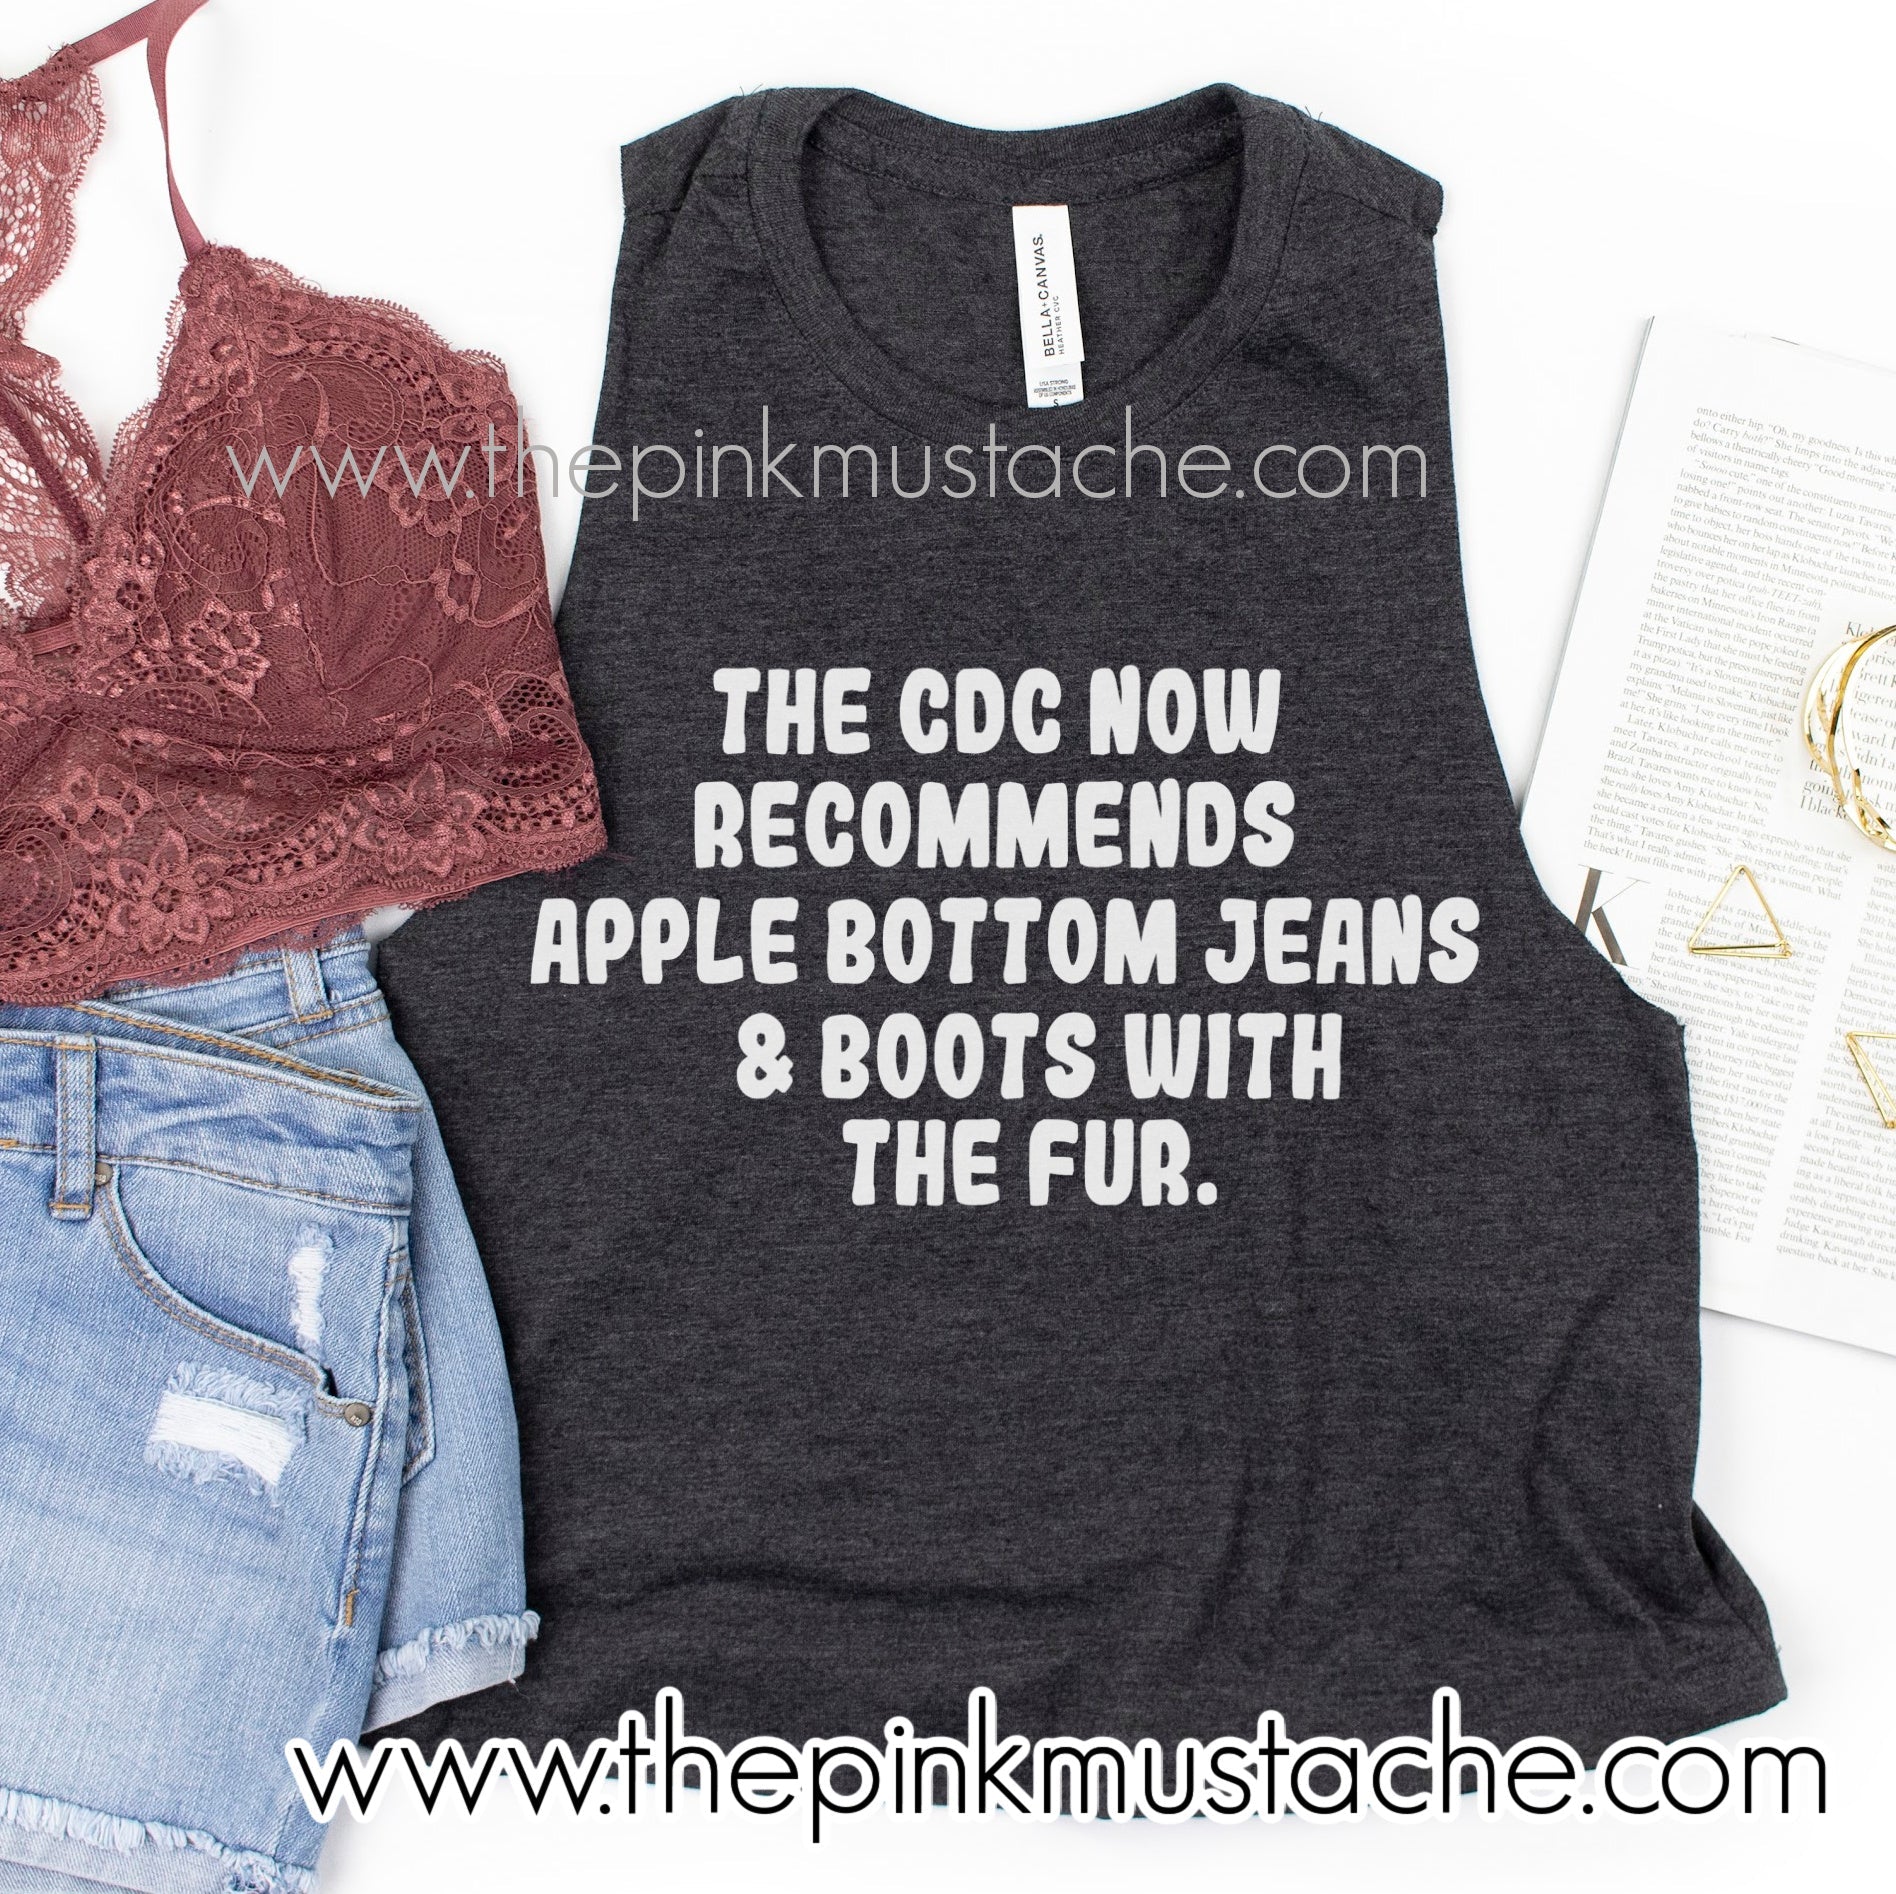 Mig selv værktøj heks The CDC Now Recommends Apple Bottom Jeans and The Boots With The Fur C –  Pink Mustache Boutique